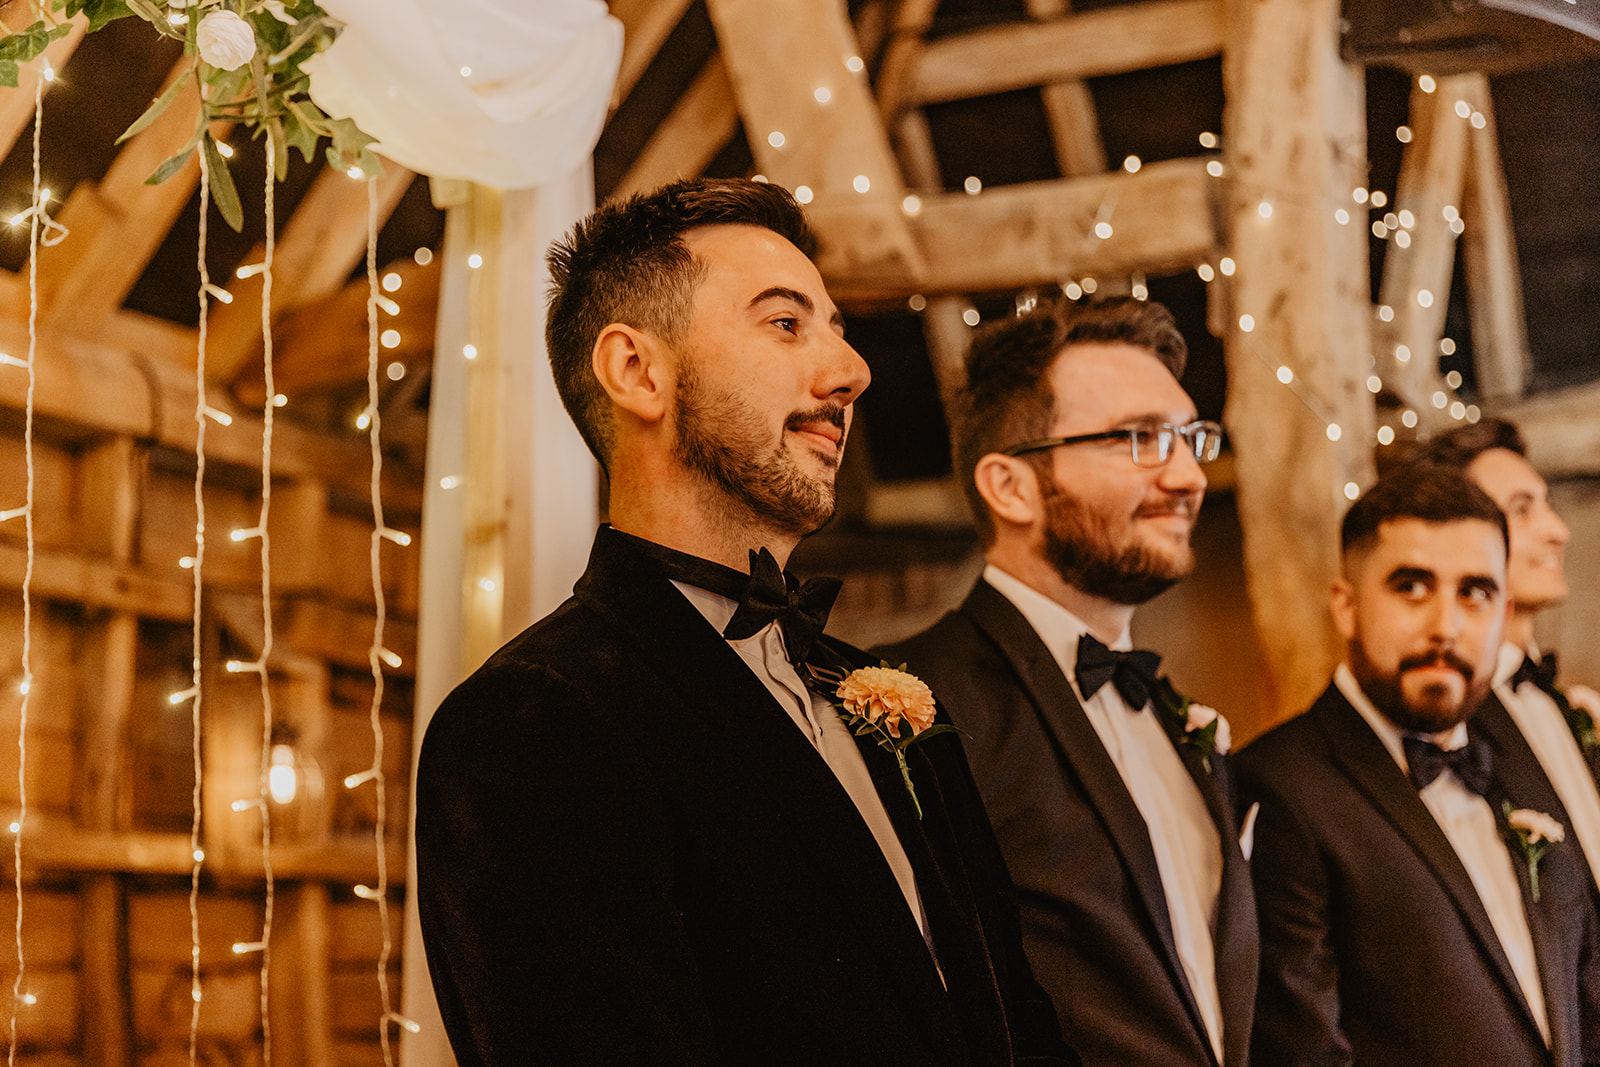 Groom at a Southlands barn wedding, Sussex. Photo by OliveJoy Photography.